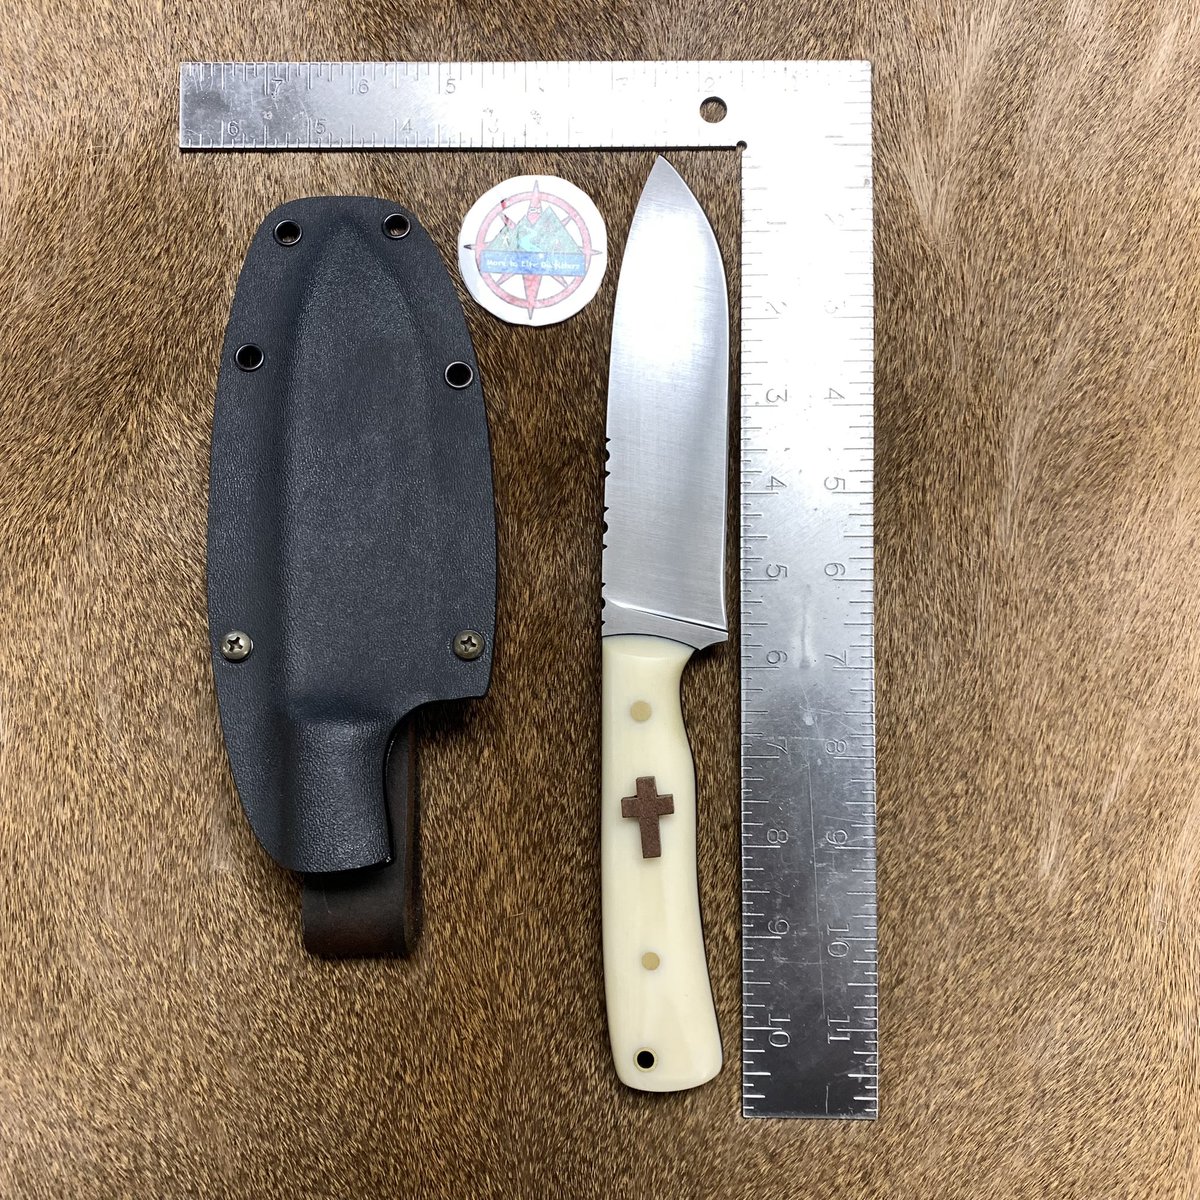 #moretolifeoutfitters #samuelrinercustomknives #soldexclusivelyatmoretolifeoutfitters #handmadeknife #locallymade #knife #easttn #andersoncountytn #oakridgetn #norristn #andersonvilletn #powelltn #hallstn #corrytontn #knoxvilletn
You can private message to order too.